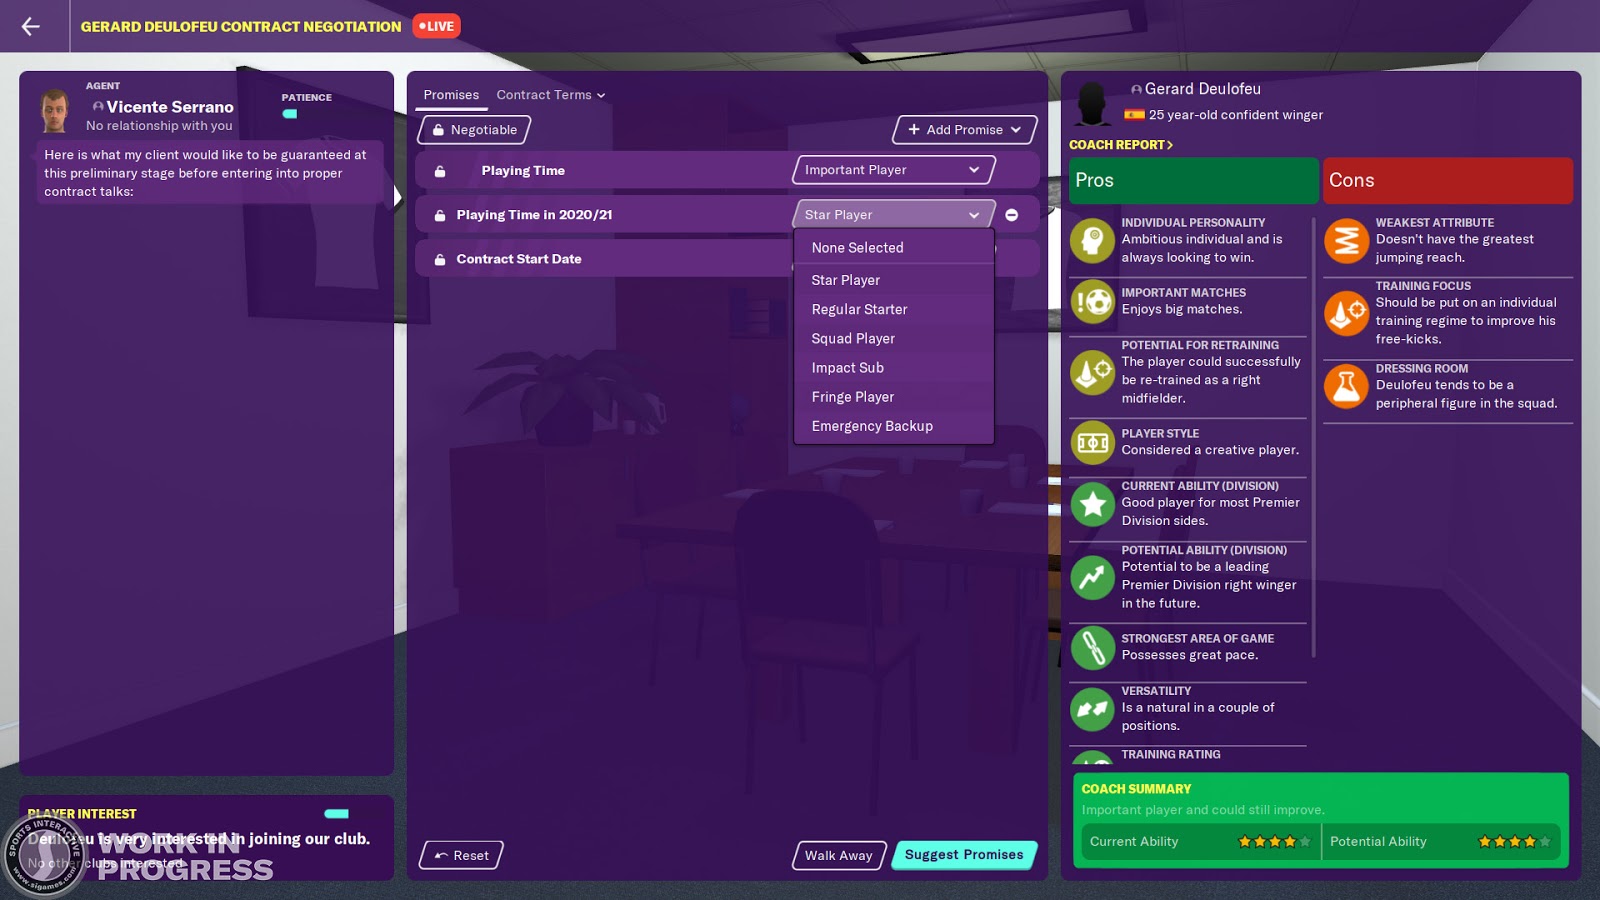 A contract offer screen with future playing time in Football Manager 2020